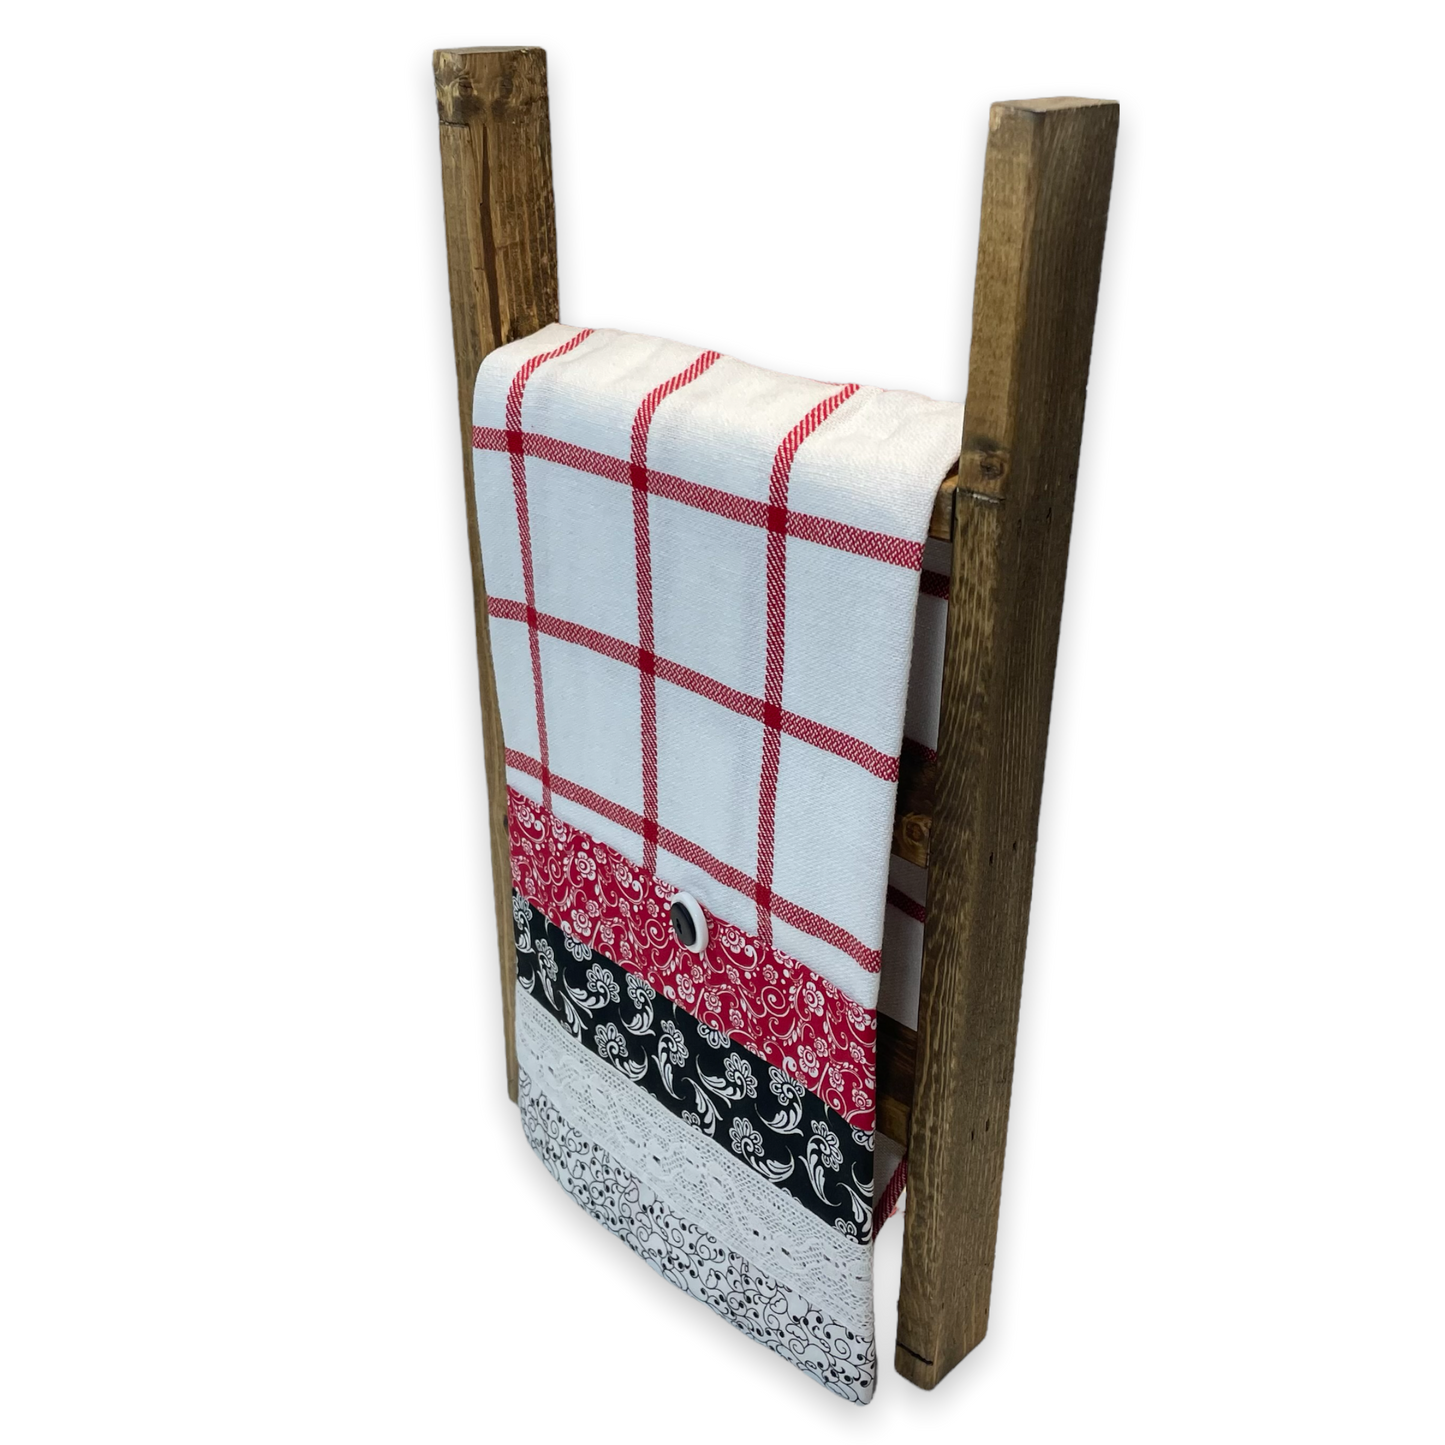 Red and white country style dish towel. Featuring red and white checked toweling; red white and black quilt cotton accents and white cotton lace trim and a double button embellishment. Part of a mix and match collection of coordinated farmhouse fabulous decor. Browse the collections and be sure to check out the Home Stitchery Decor YouTube Channel.